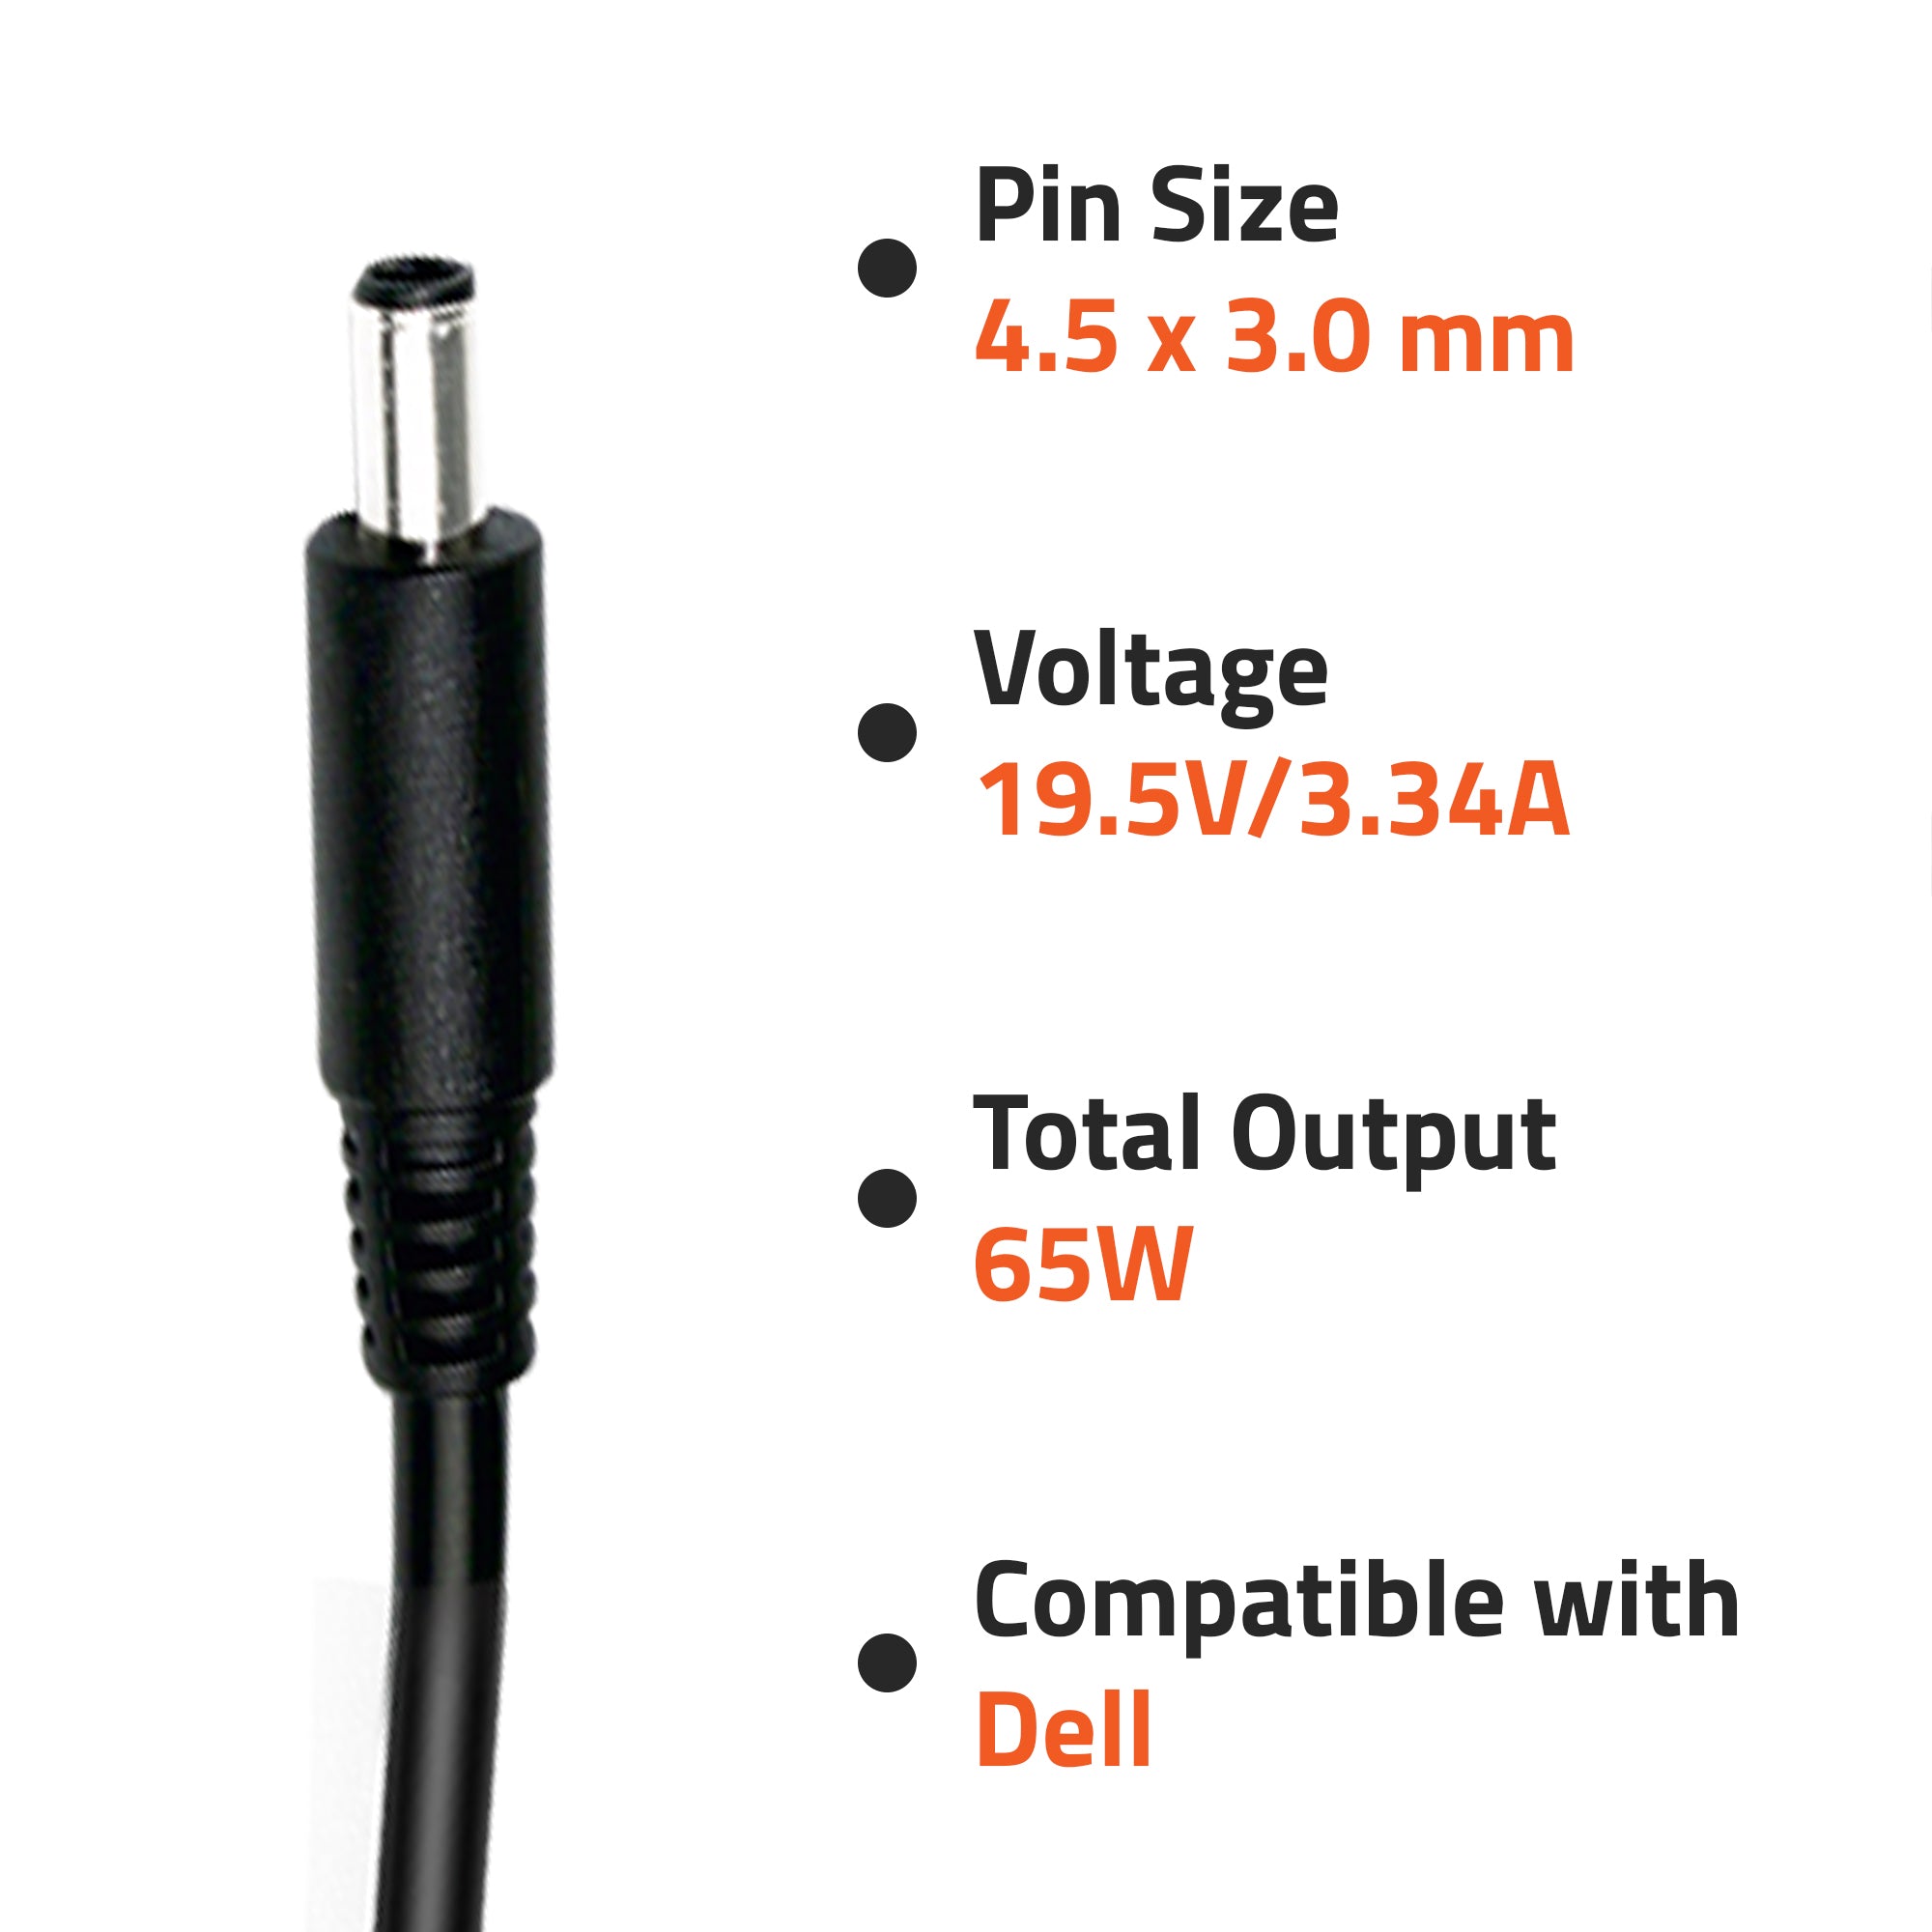 AR0501(N) 65 Watt Laptop Charger Adapter Compatible with Dell Laptops (19.5V/3.34A ,Pin : 4.5 x 3.0mm)